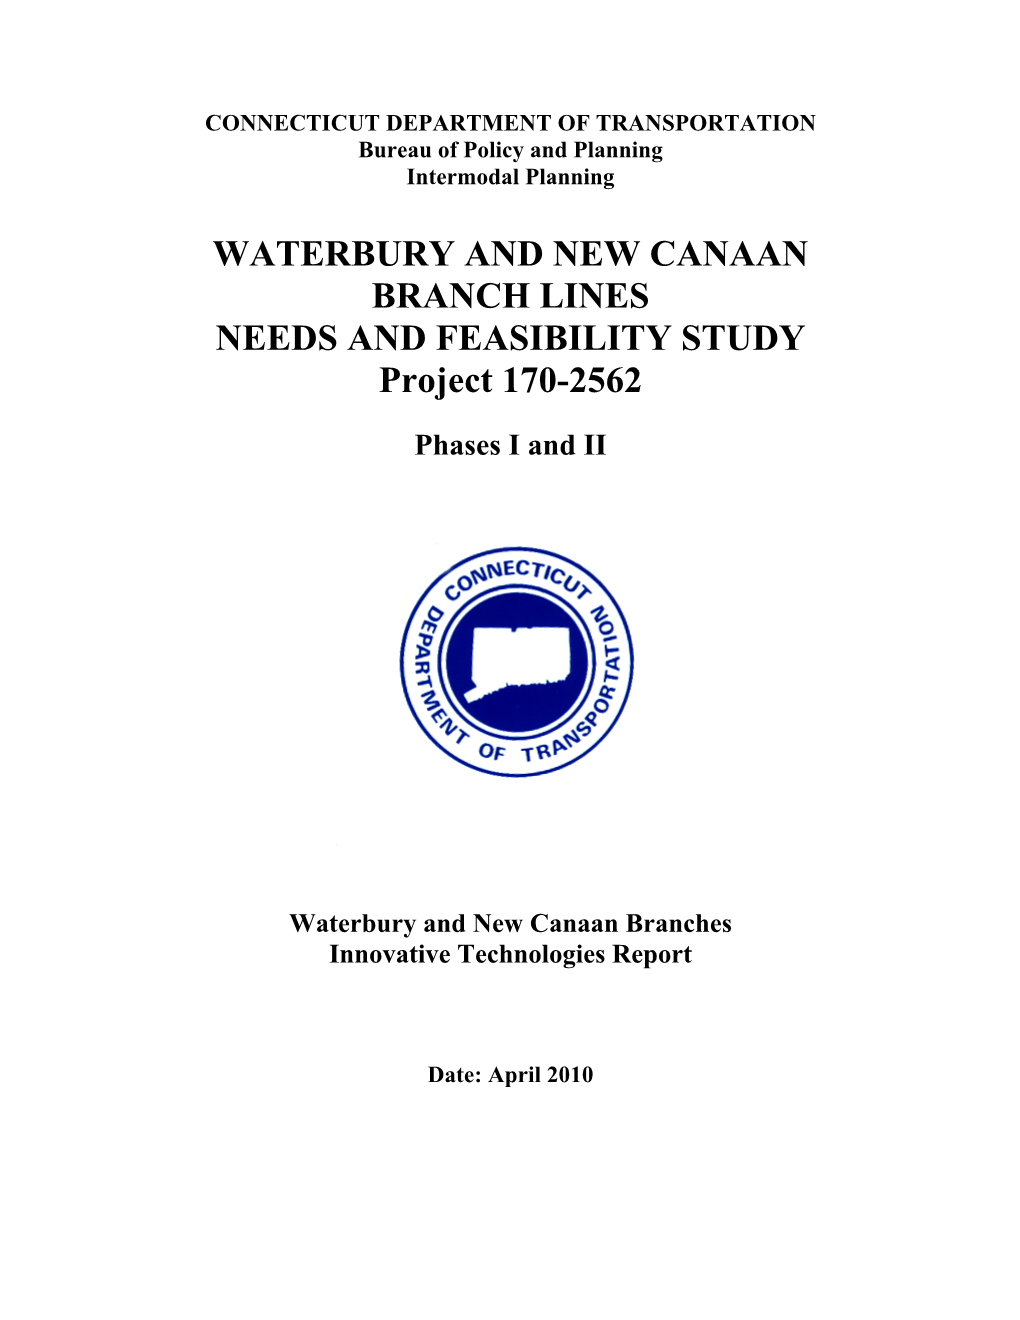 WATERBURY and NEW CANAAN BRANCH LINES NEEDS and FEASIBILITY STUDY Project 170-2562